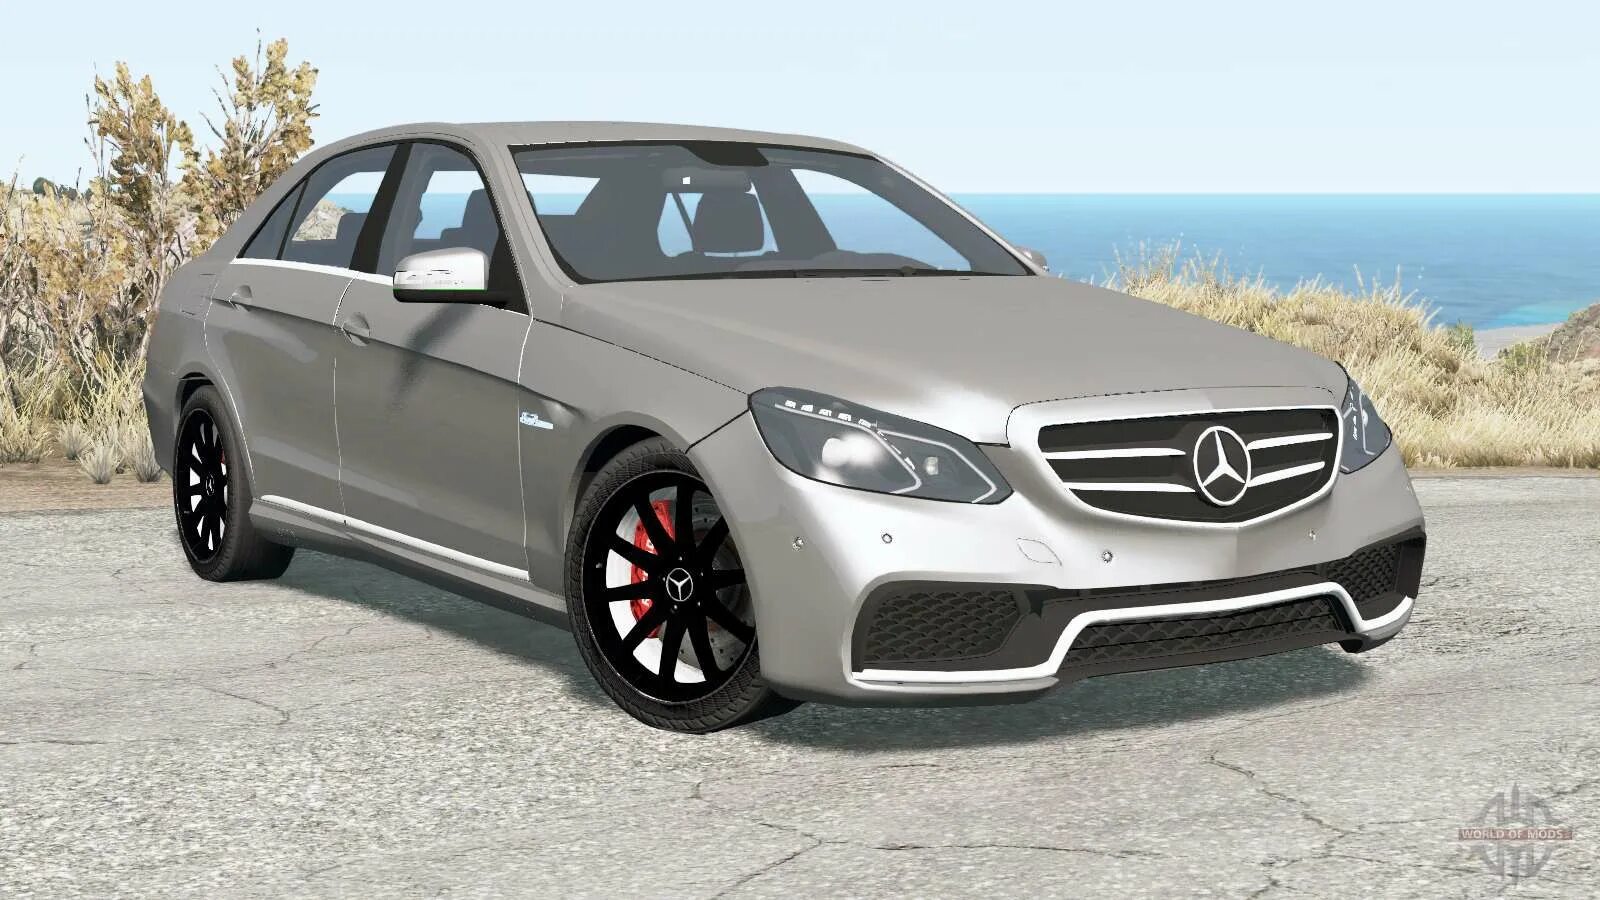 Beamng mod mercedes. Mercedes e63 AMG для BEAMNG Drive. E63 BEAMNG Drive w212. Mercedes w212 BEAMNG Drive. W212 for BEAMNG Drive.